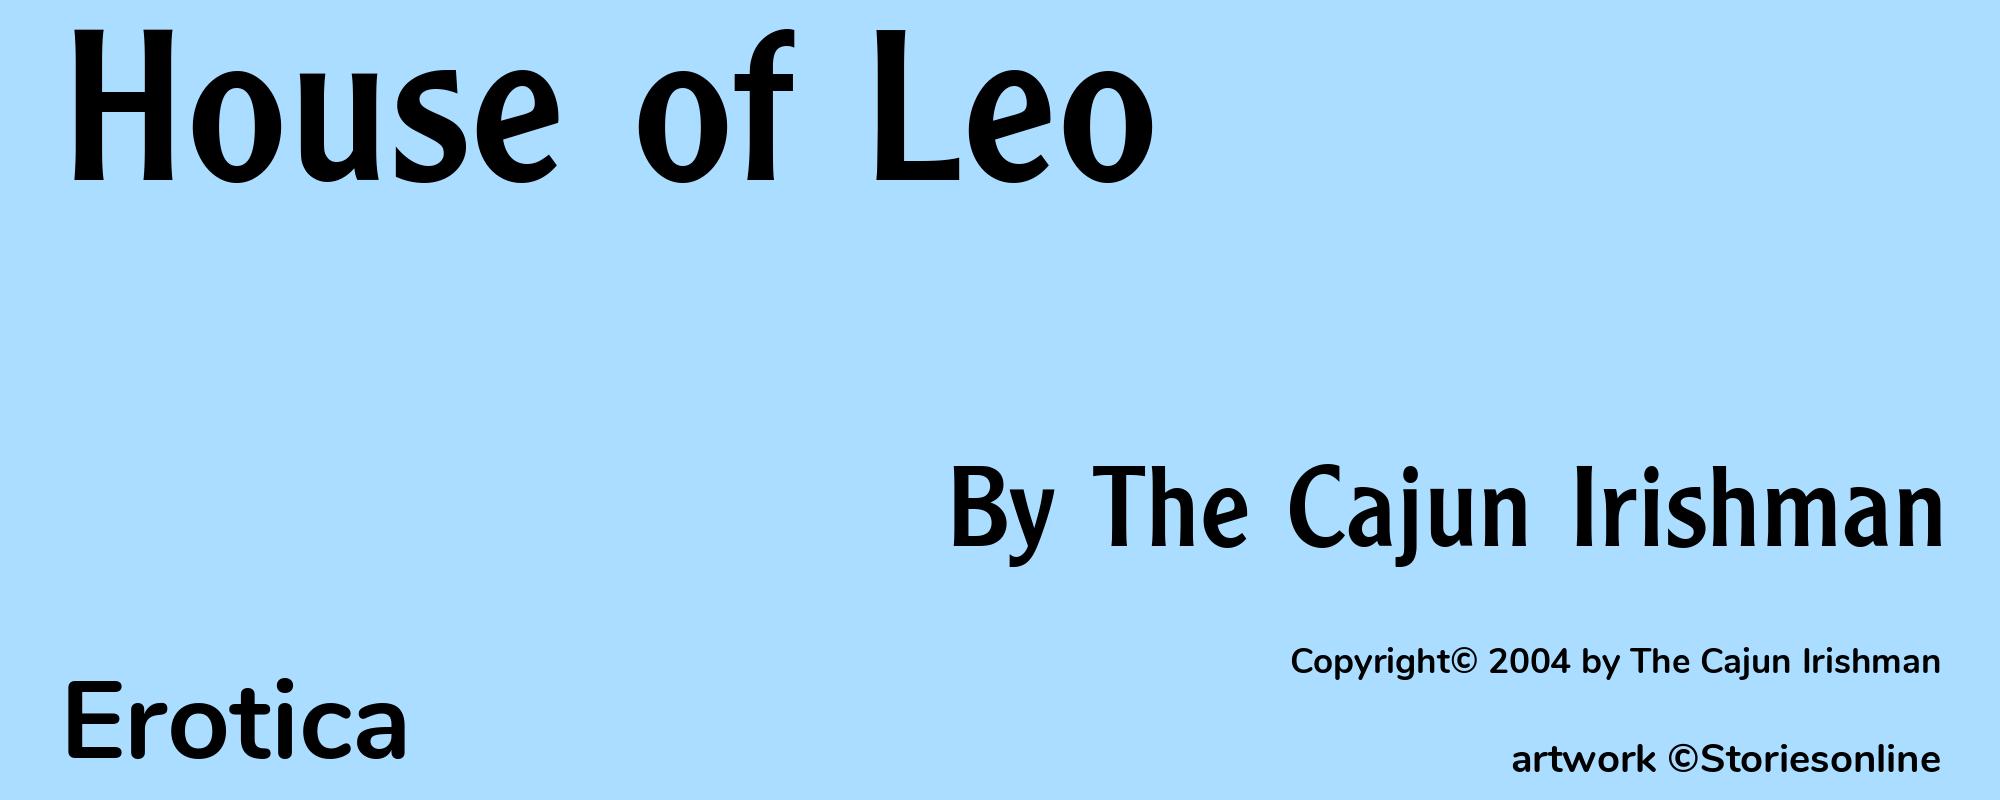 House of Leo - Cover